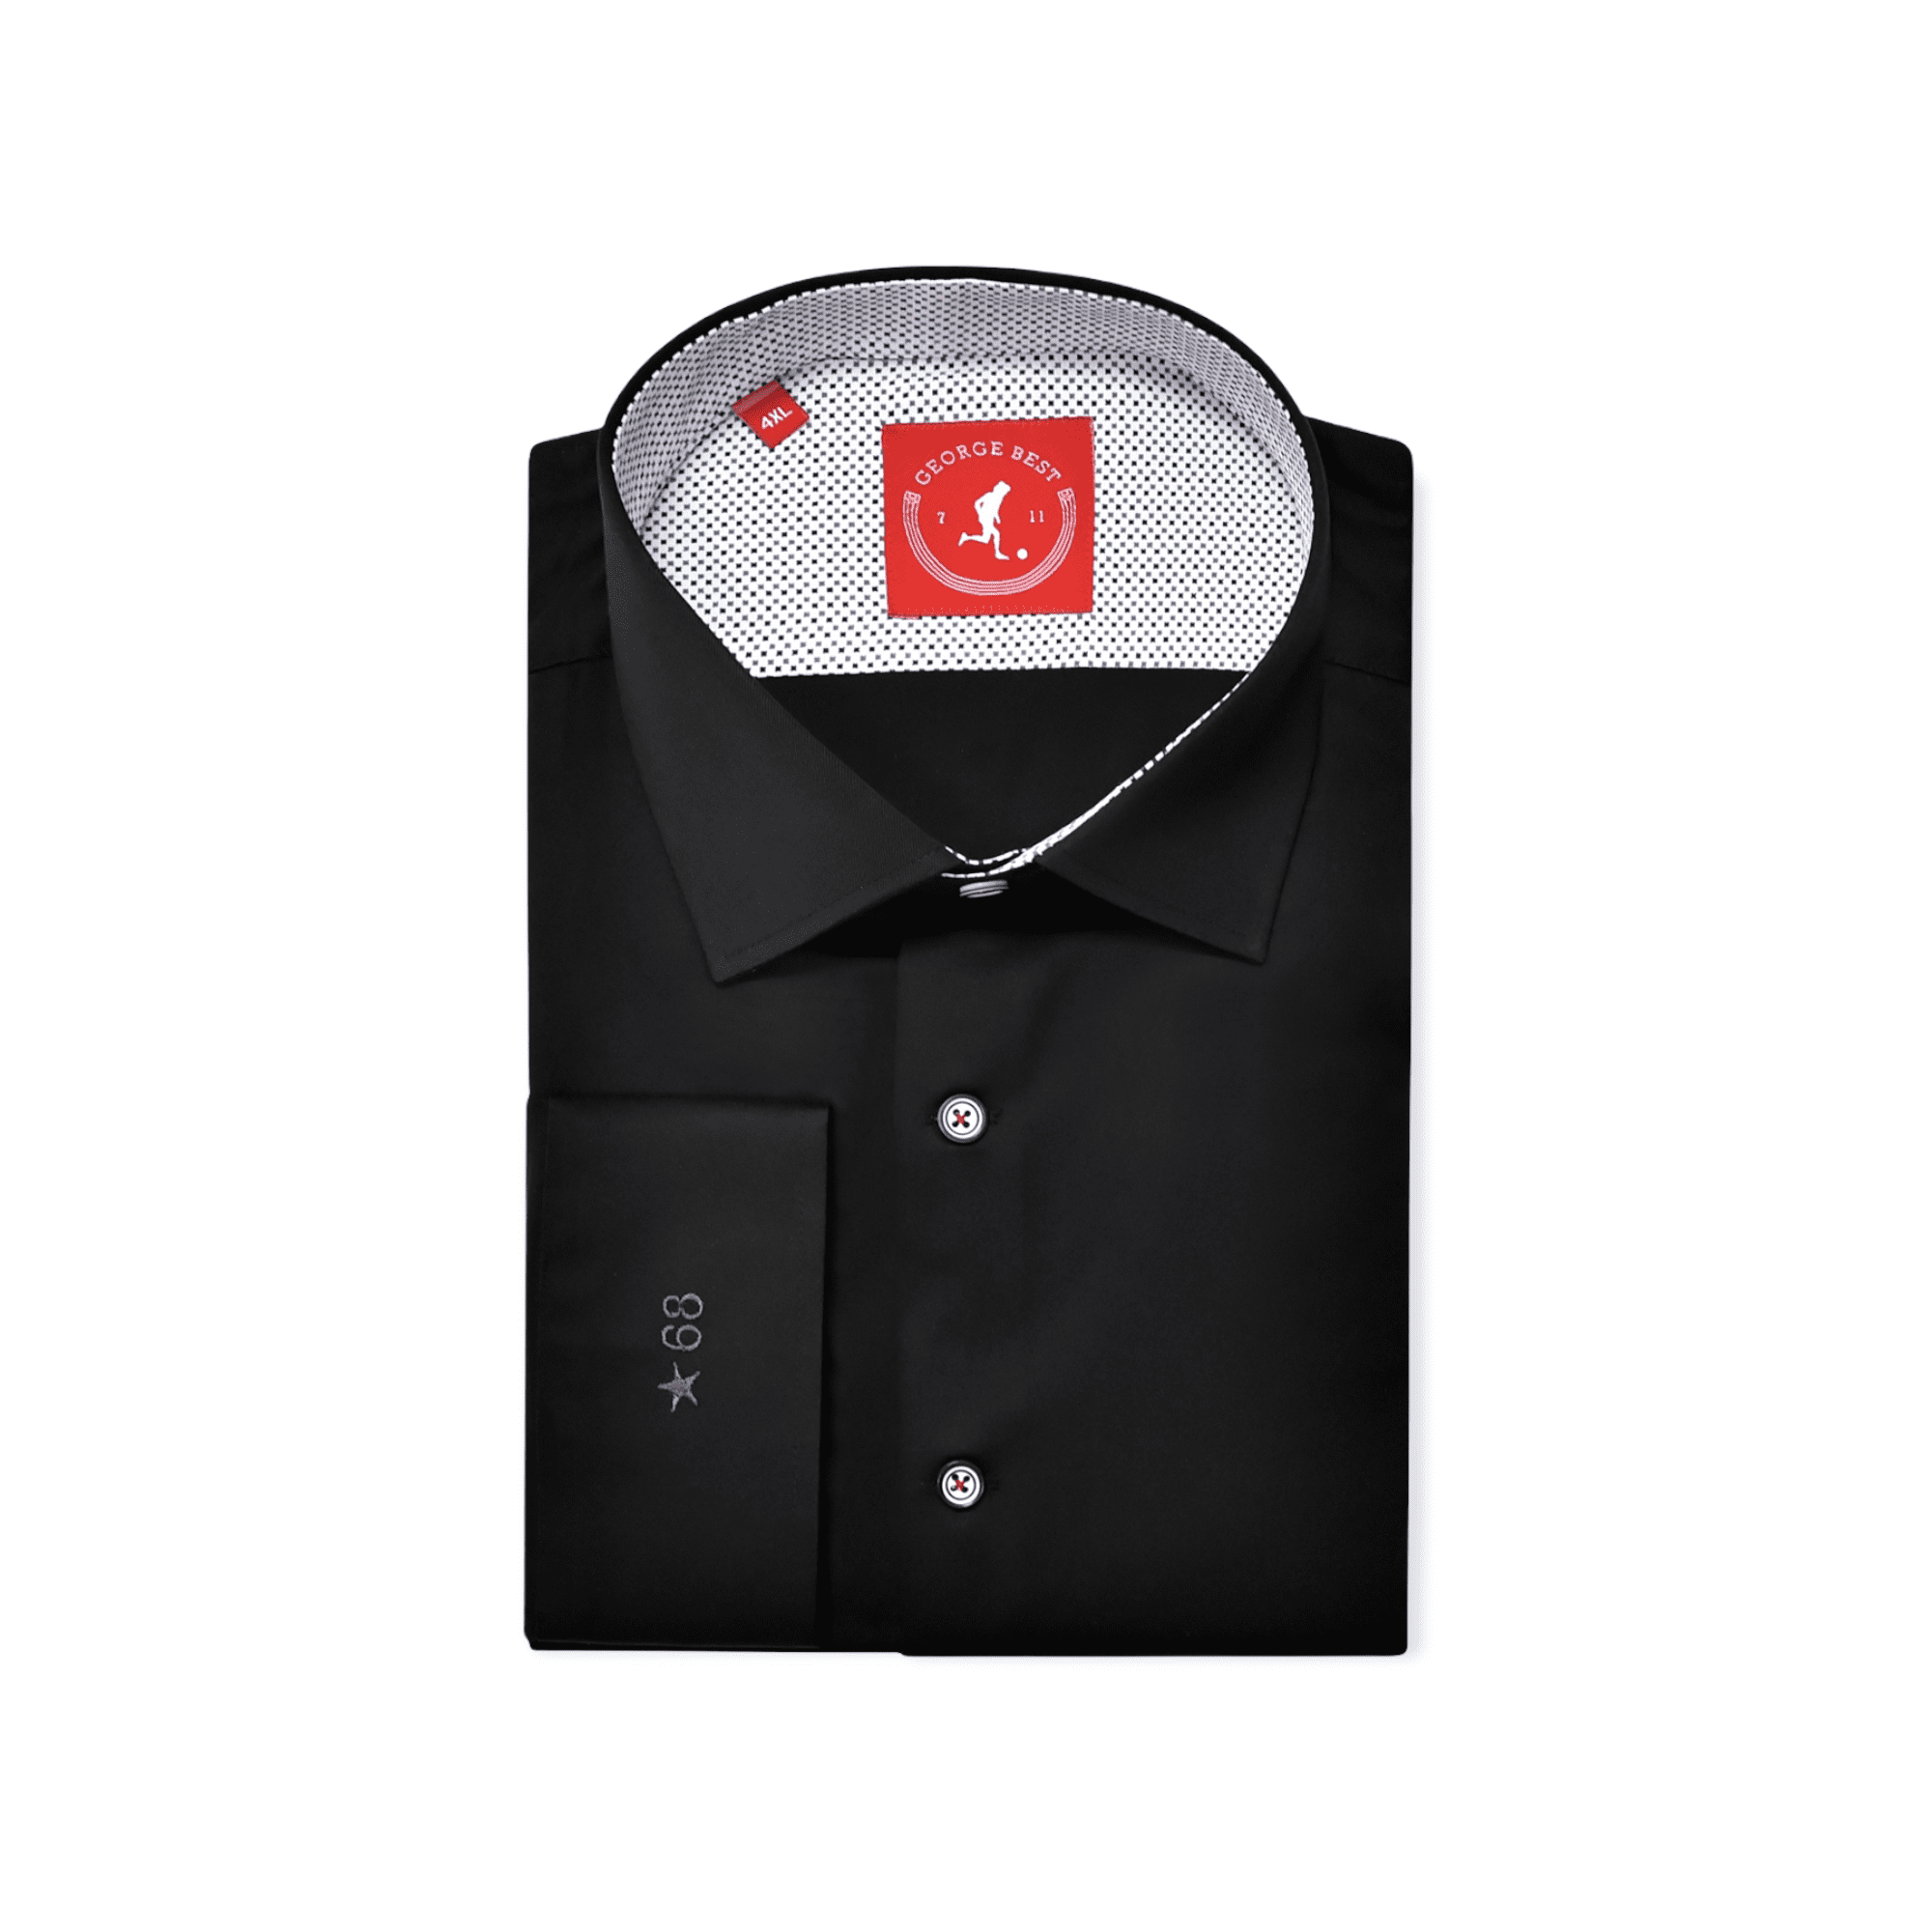 Tailored Fit Black Shirt With Cross Print